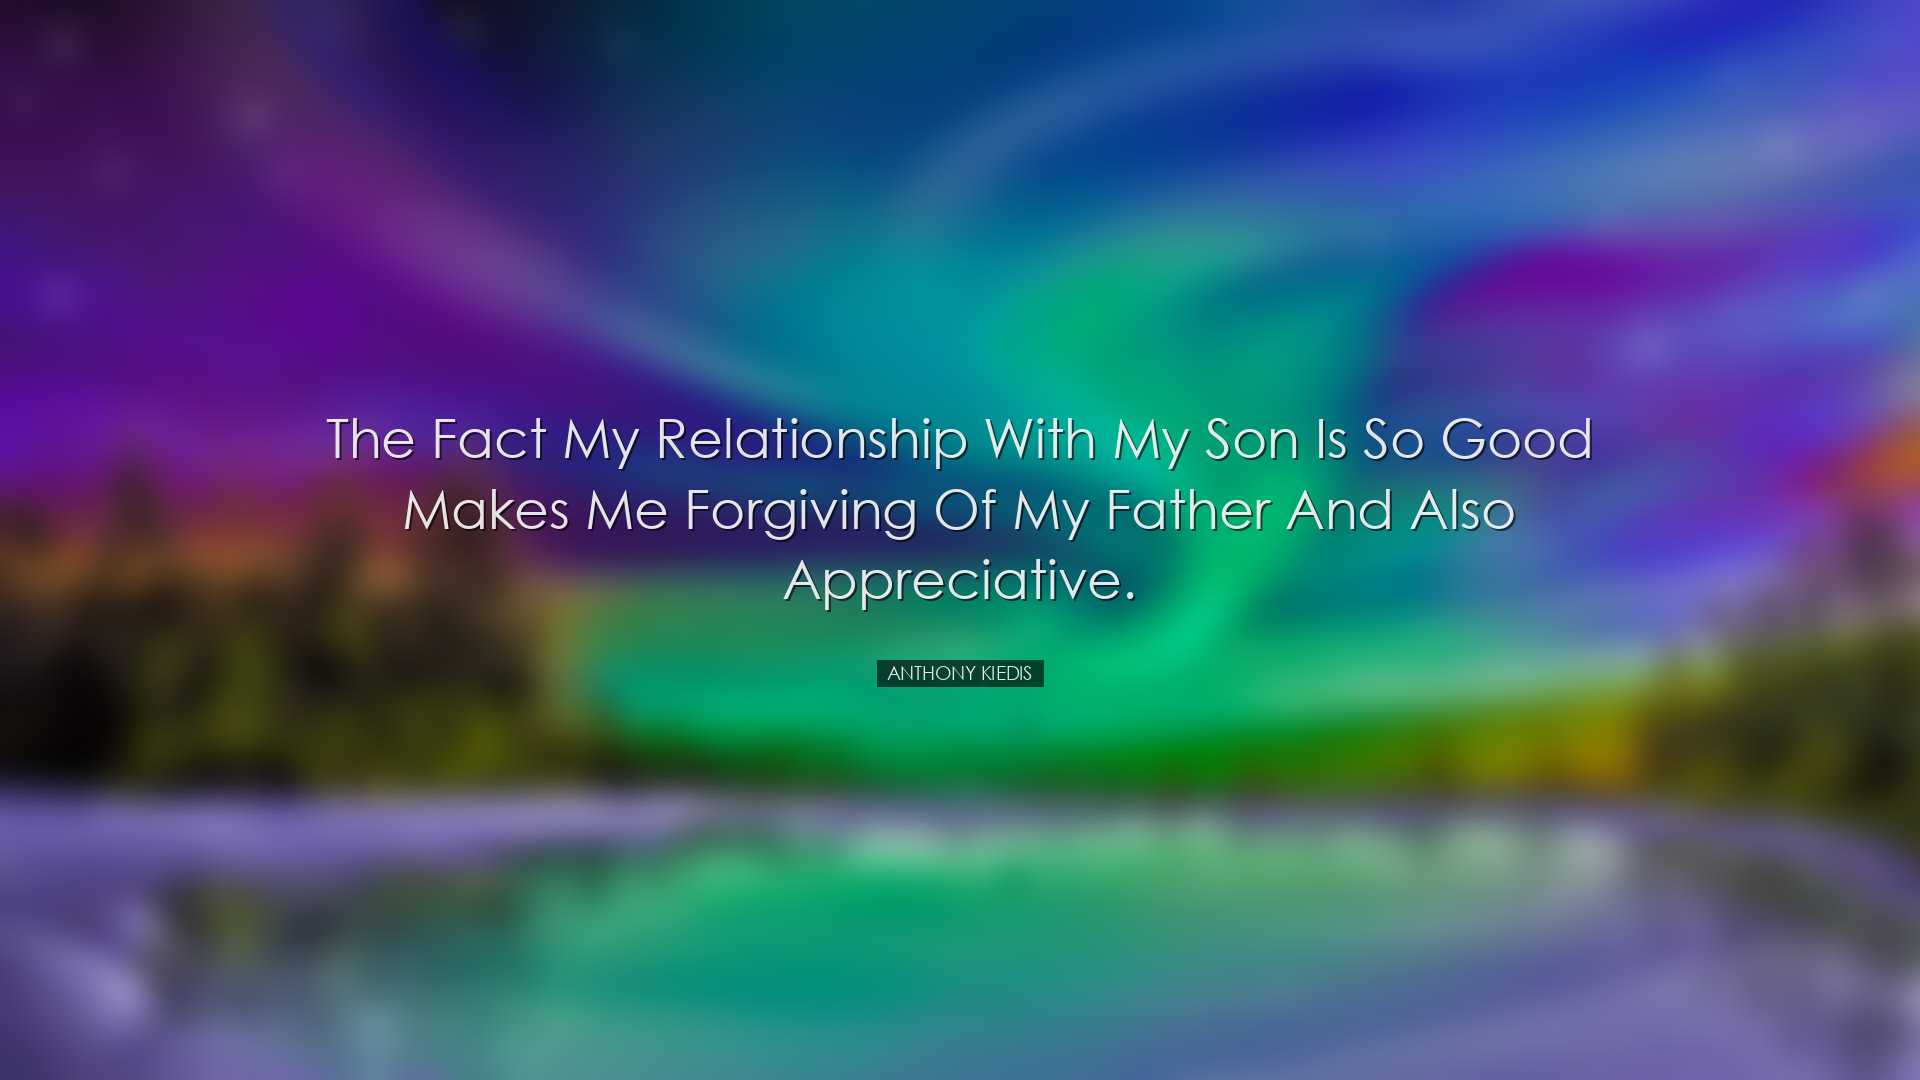 The fact my relationship with my son is so good makes me forgiving